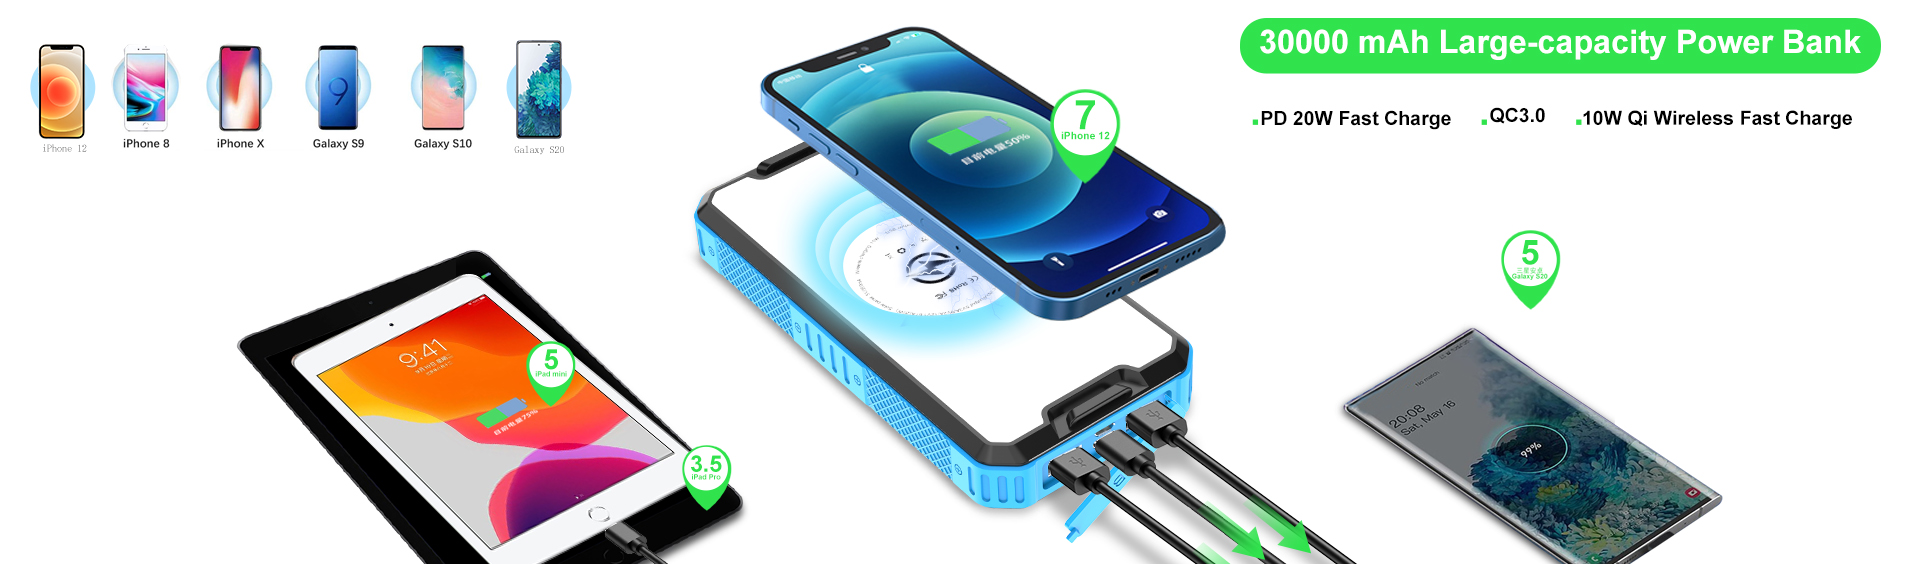 solar power bank phone charger